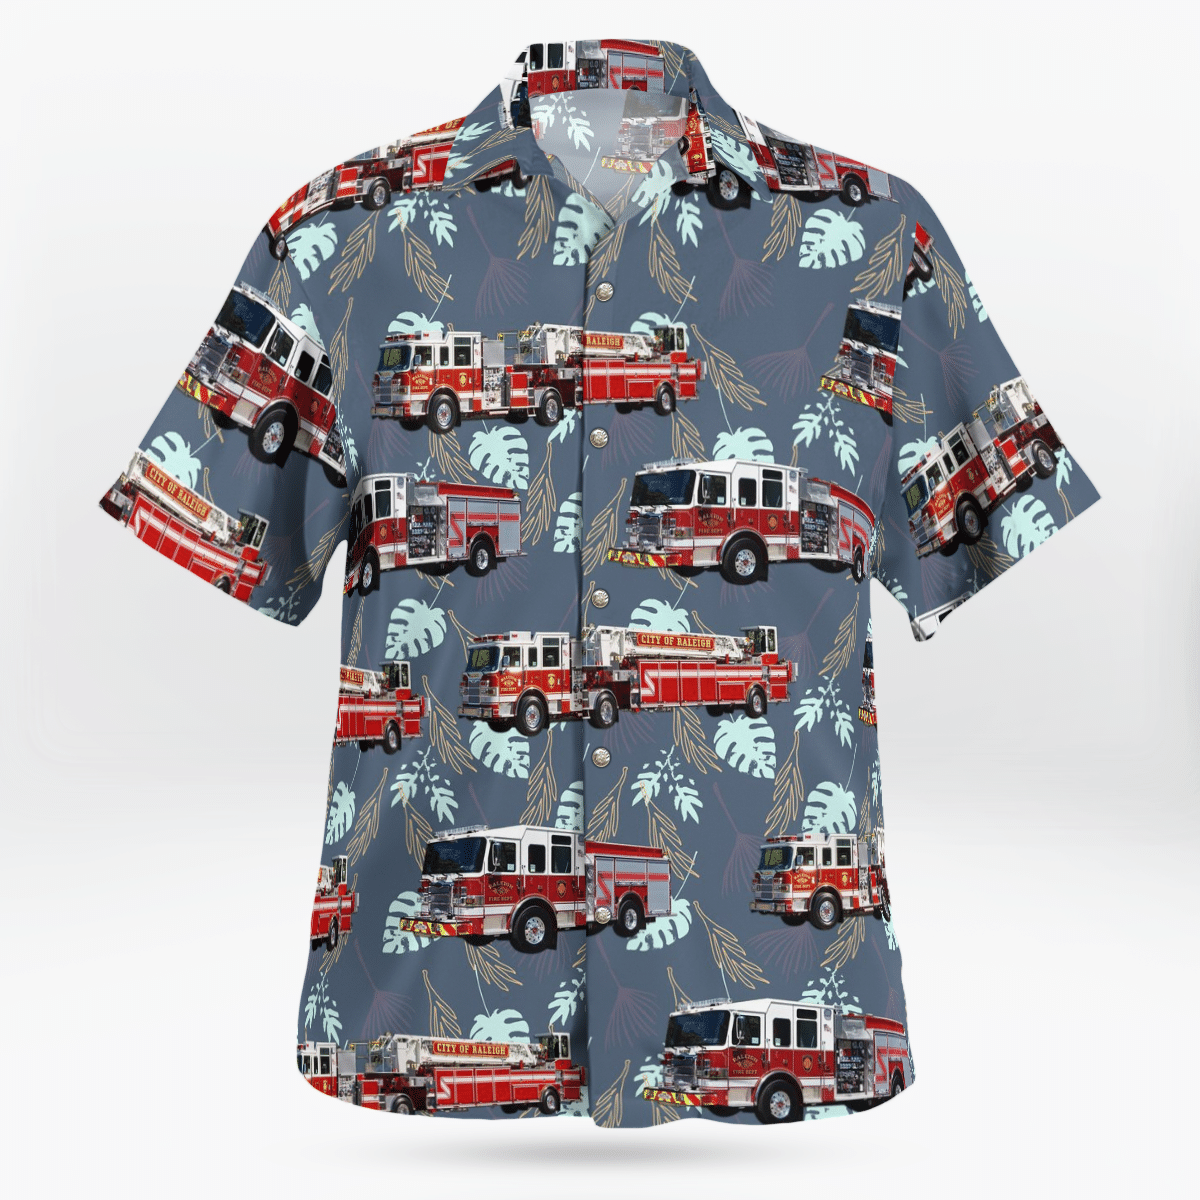 Hawaiian shirts never go out of style 167